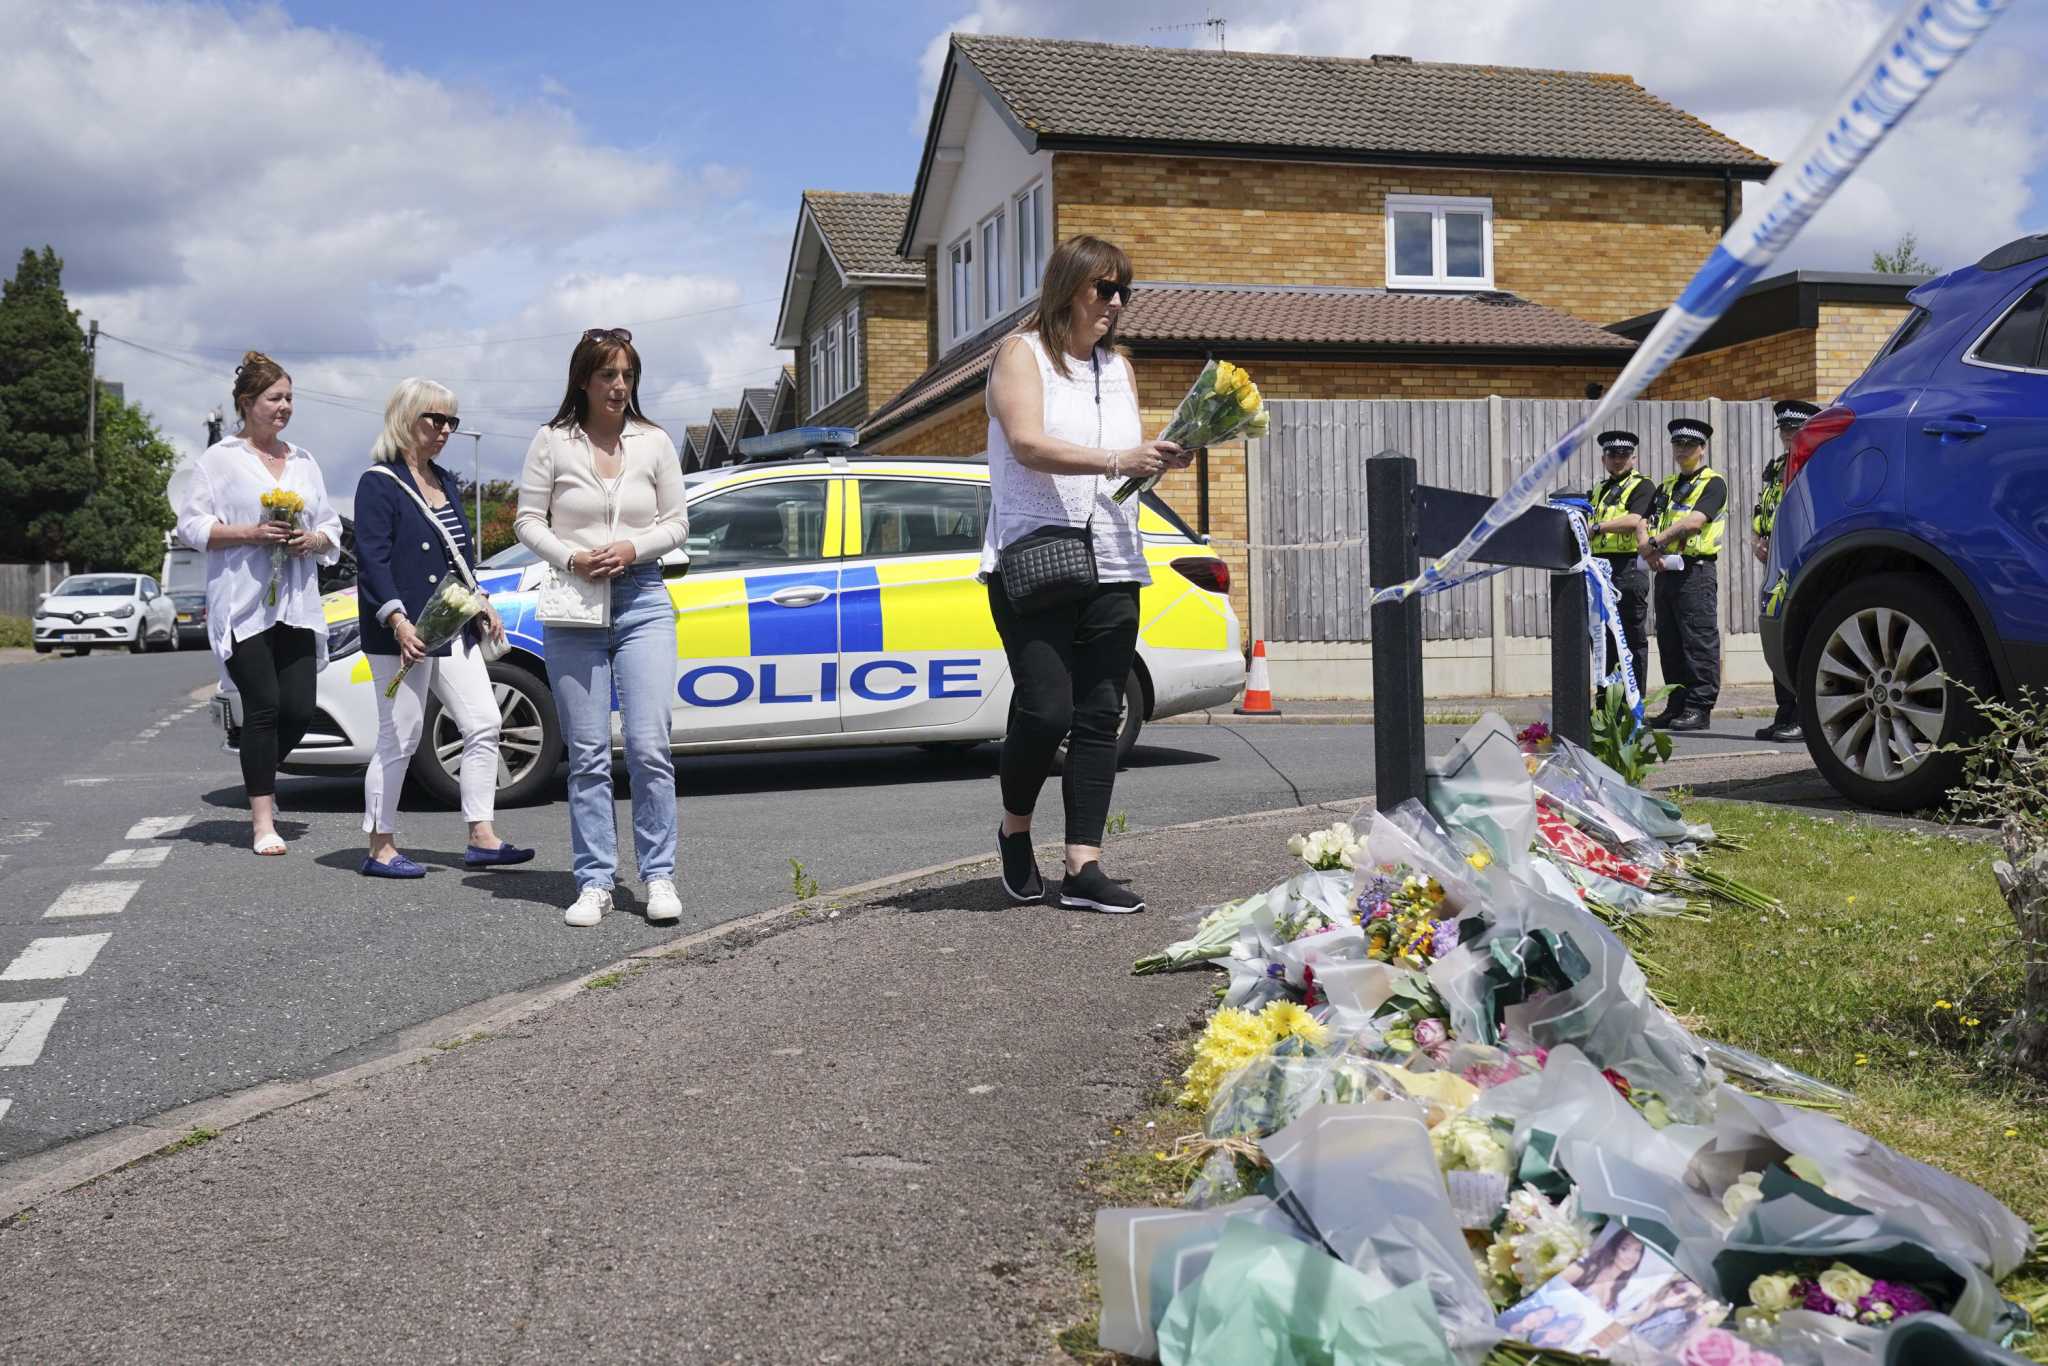 UK inquest hears how 1 of 3 women killed at home in crossbow attack managed to text for help